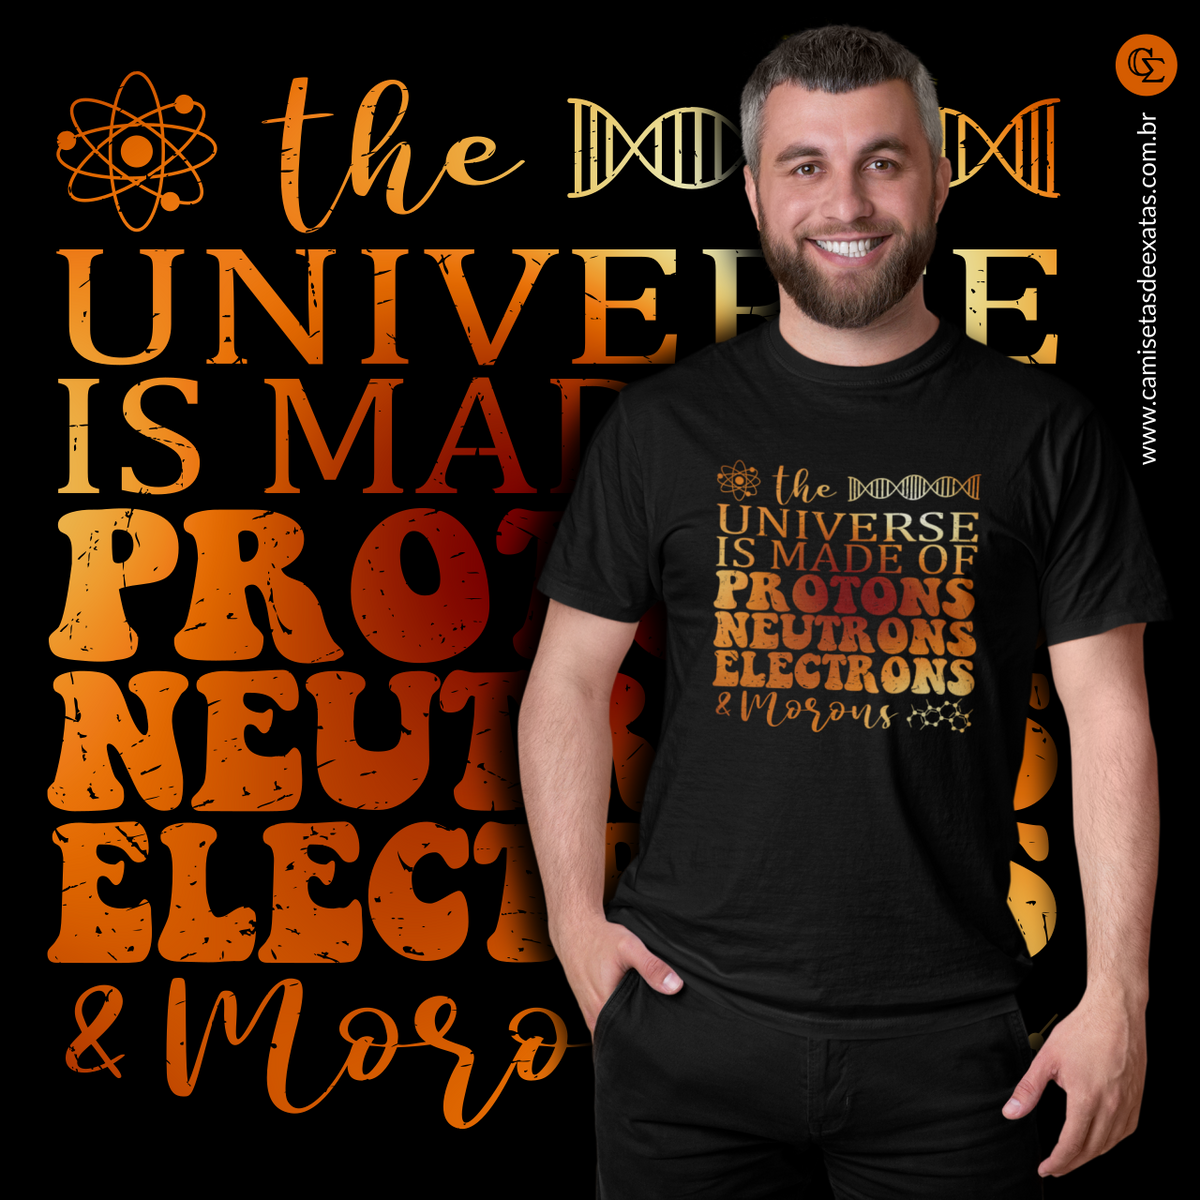 Nome do produto: THE UNIVERSE IS MADE OF [4.2]